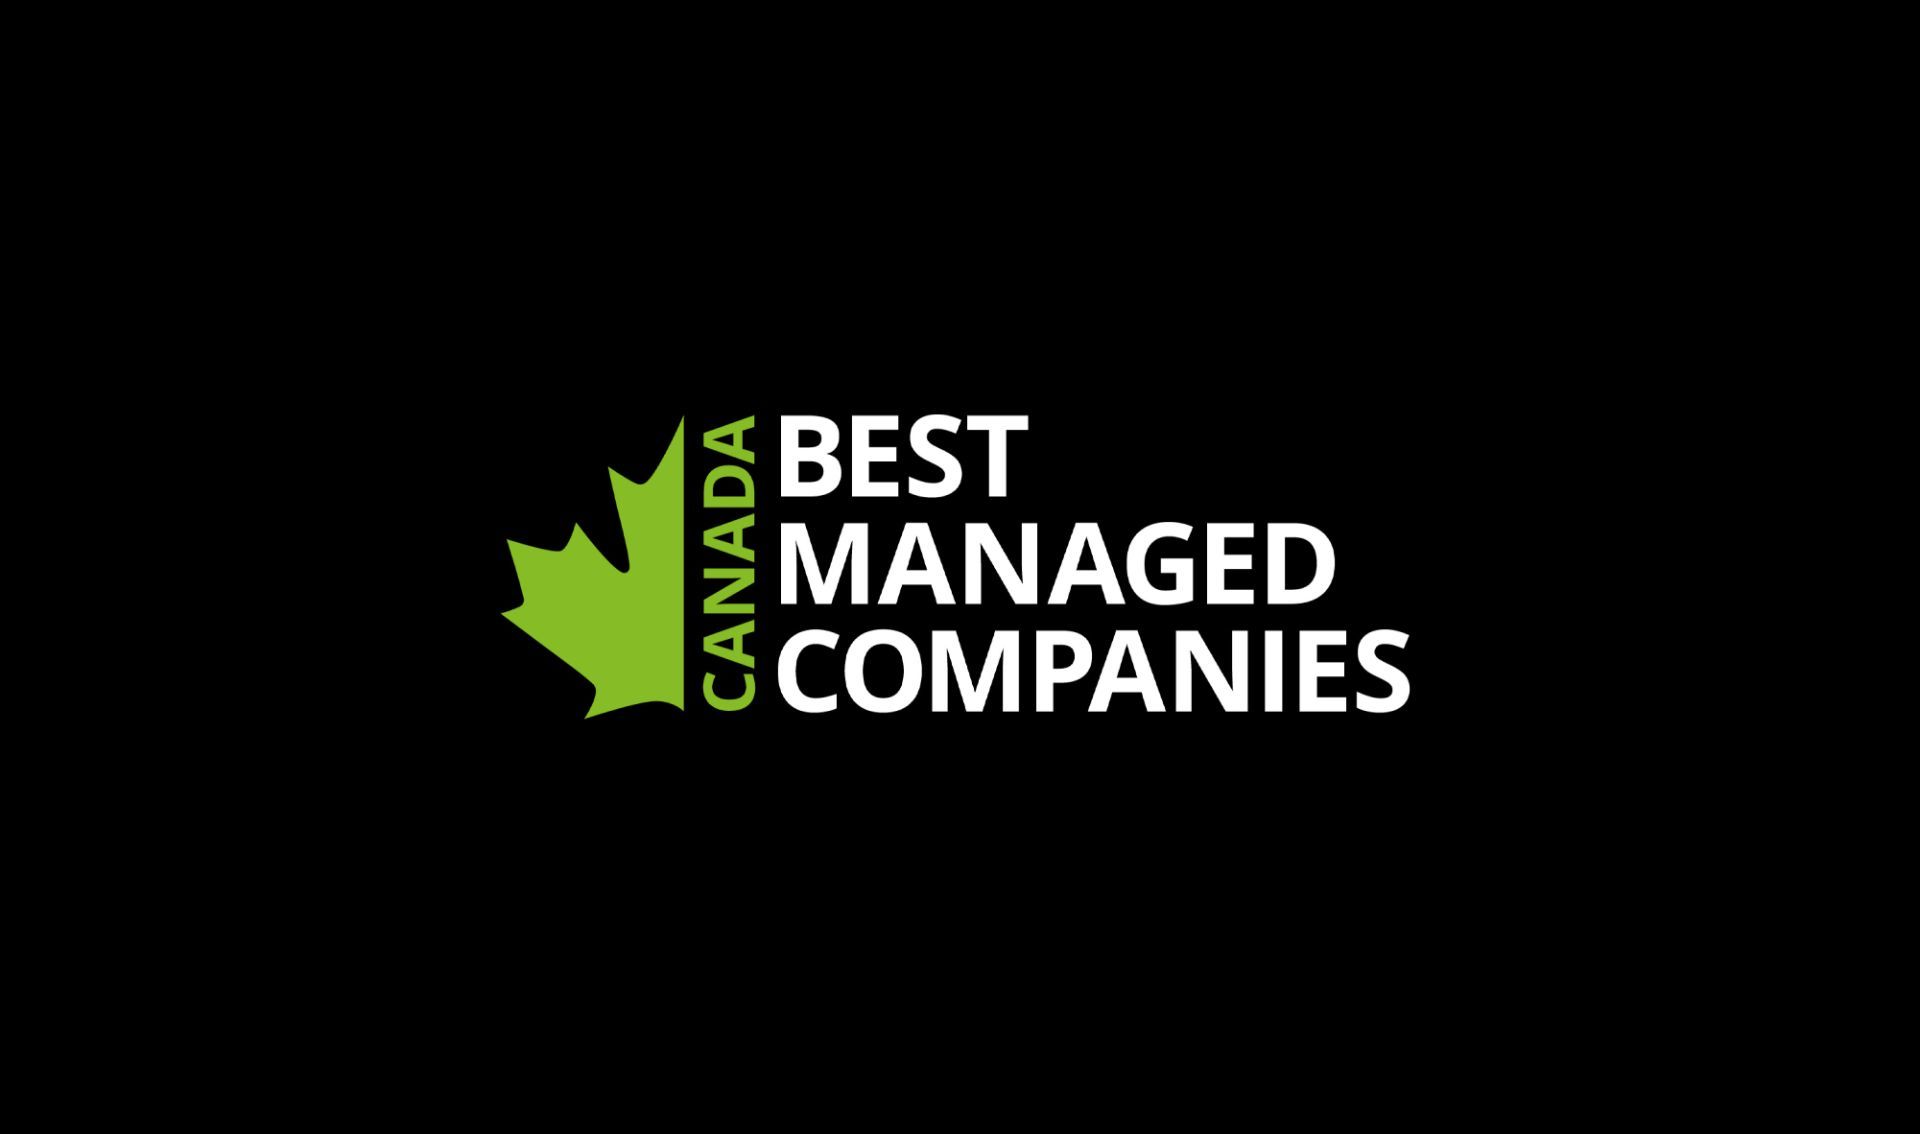 The Humberview Group named one of Canada’s Best Managed Companies